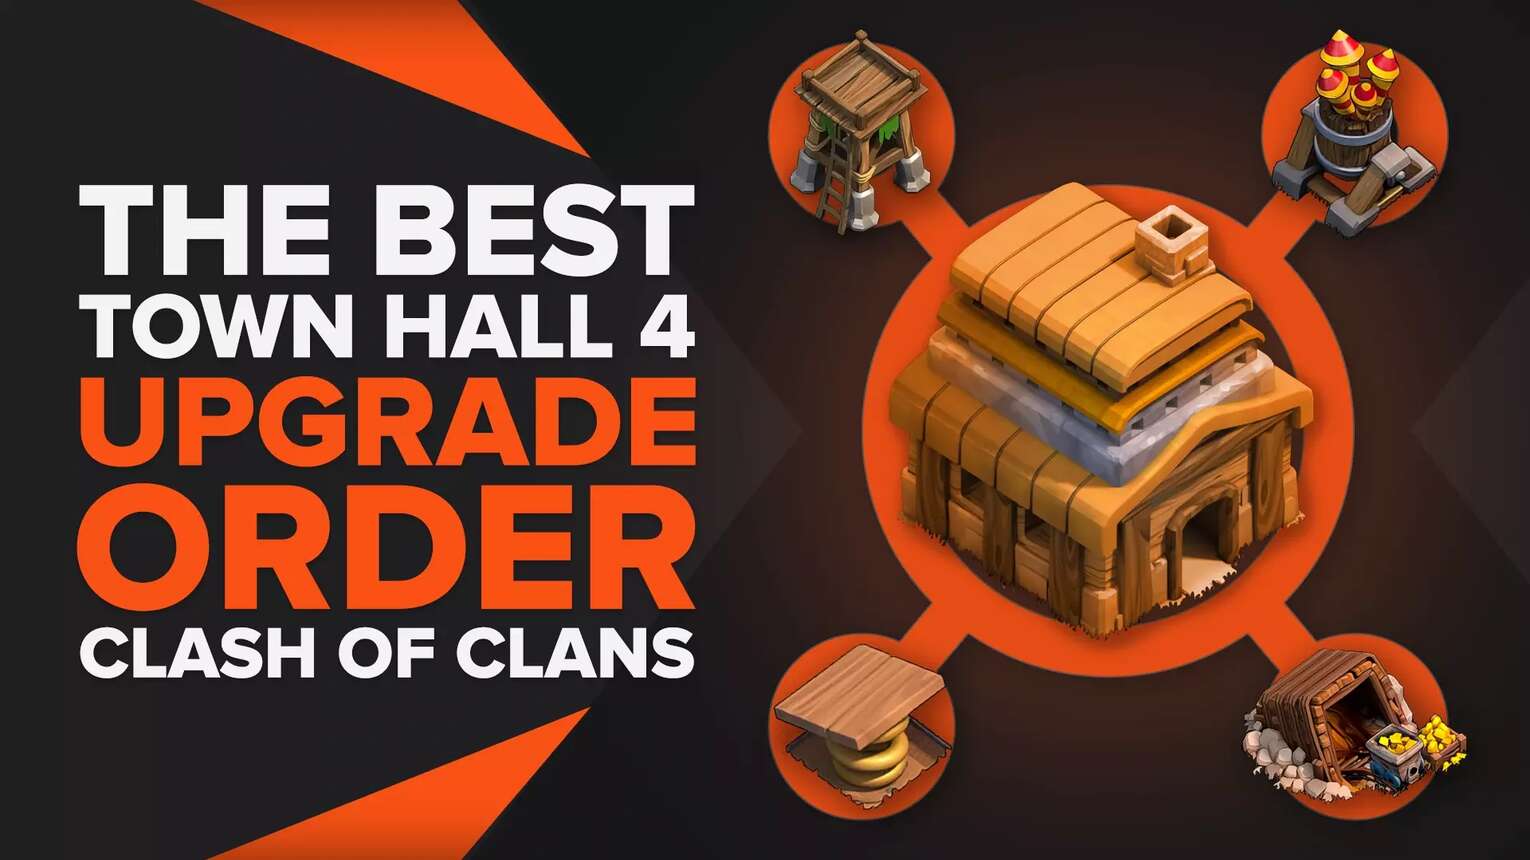 See The Best Town Hall 4 Upgrade Order In Clash Of Clans!